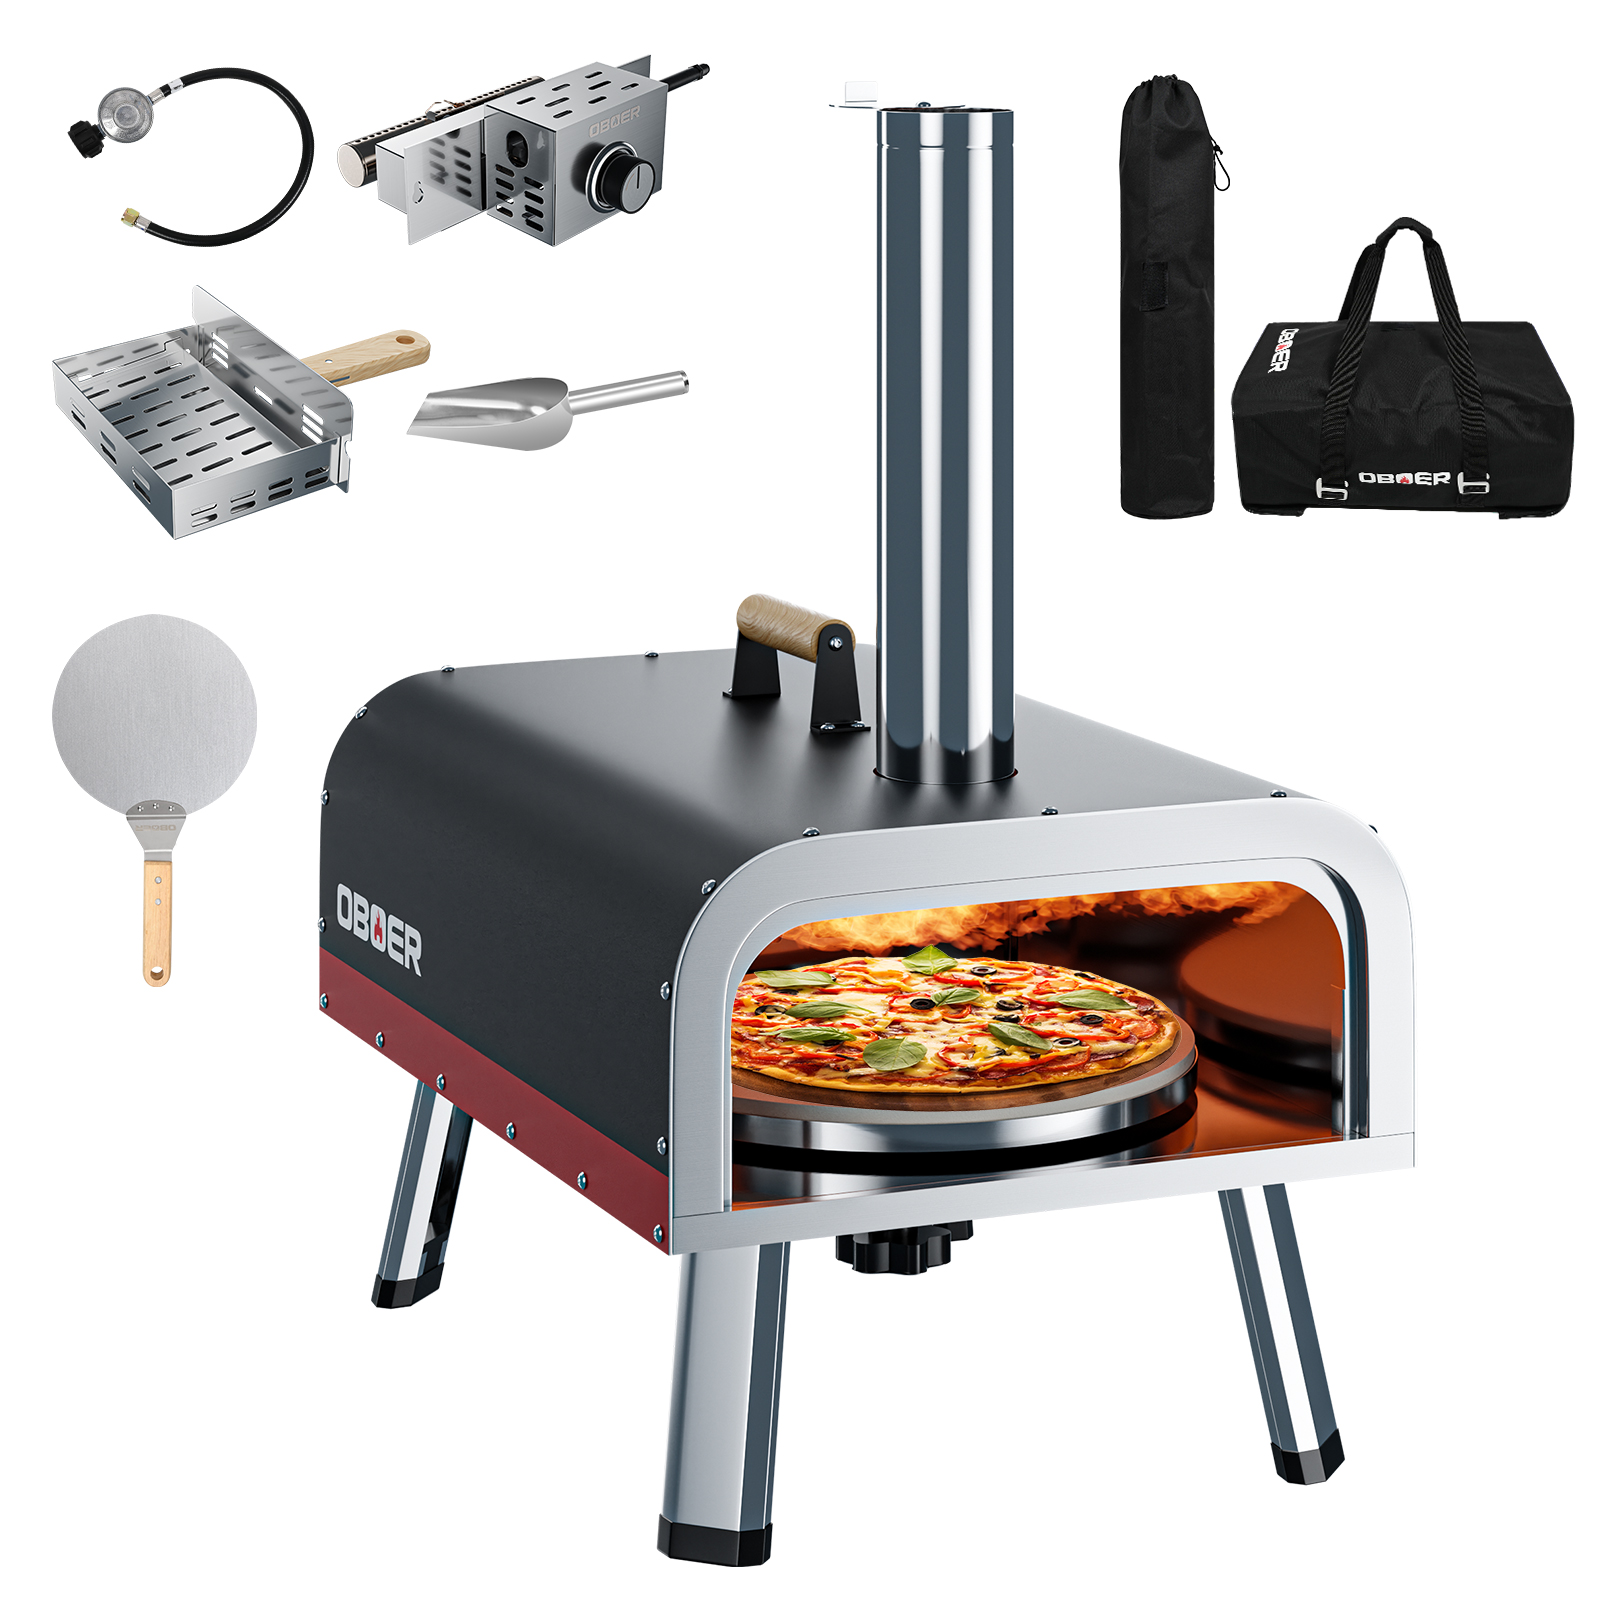 LILYPELLE Portable Pizza Oven, 12" Pellet Pizza Oven, Stainless Steel Pizza Oven Outdoor, Wood &Gas Powered Pizza Oven with Foldable Feet & Complete Accessories - image 2 of 13